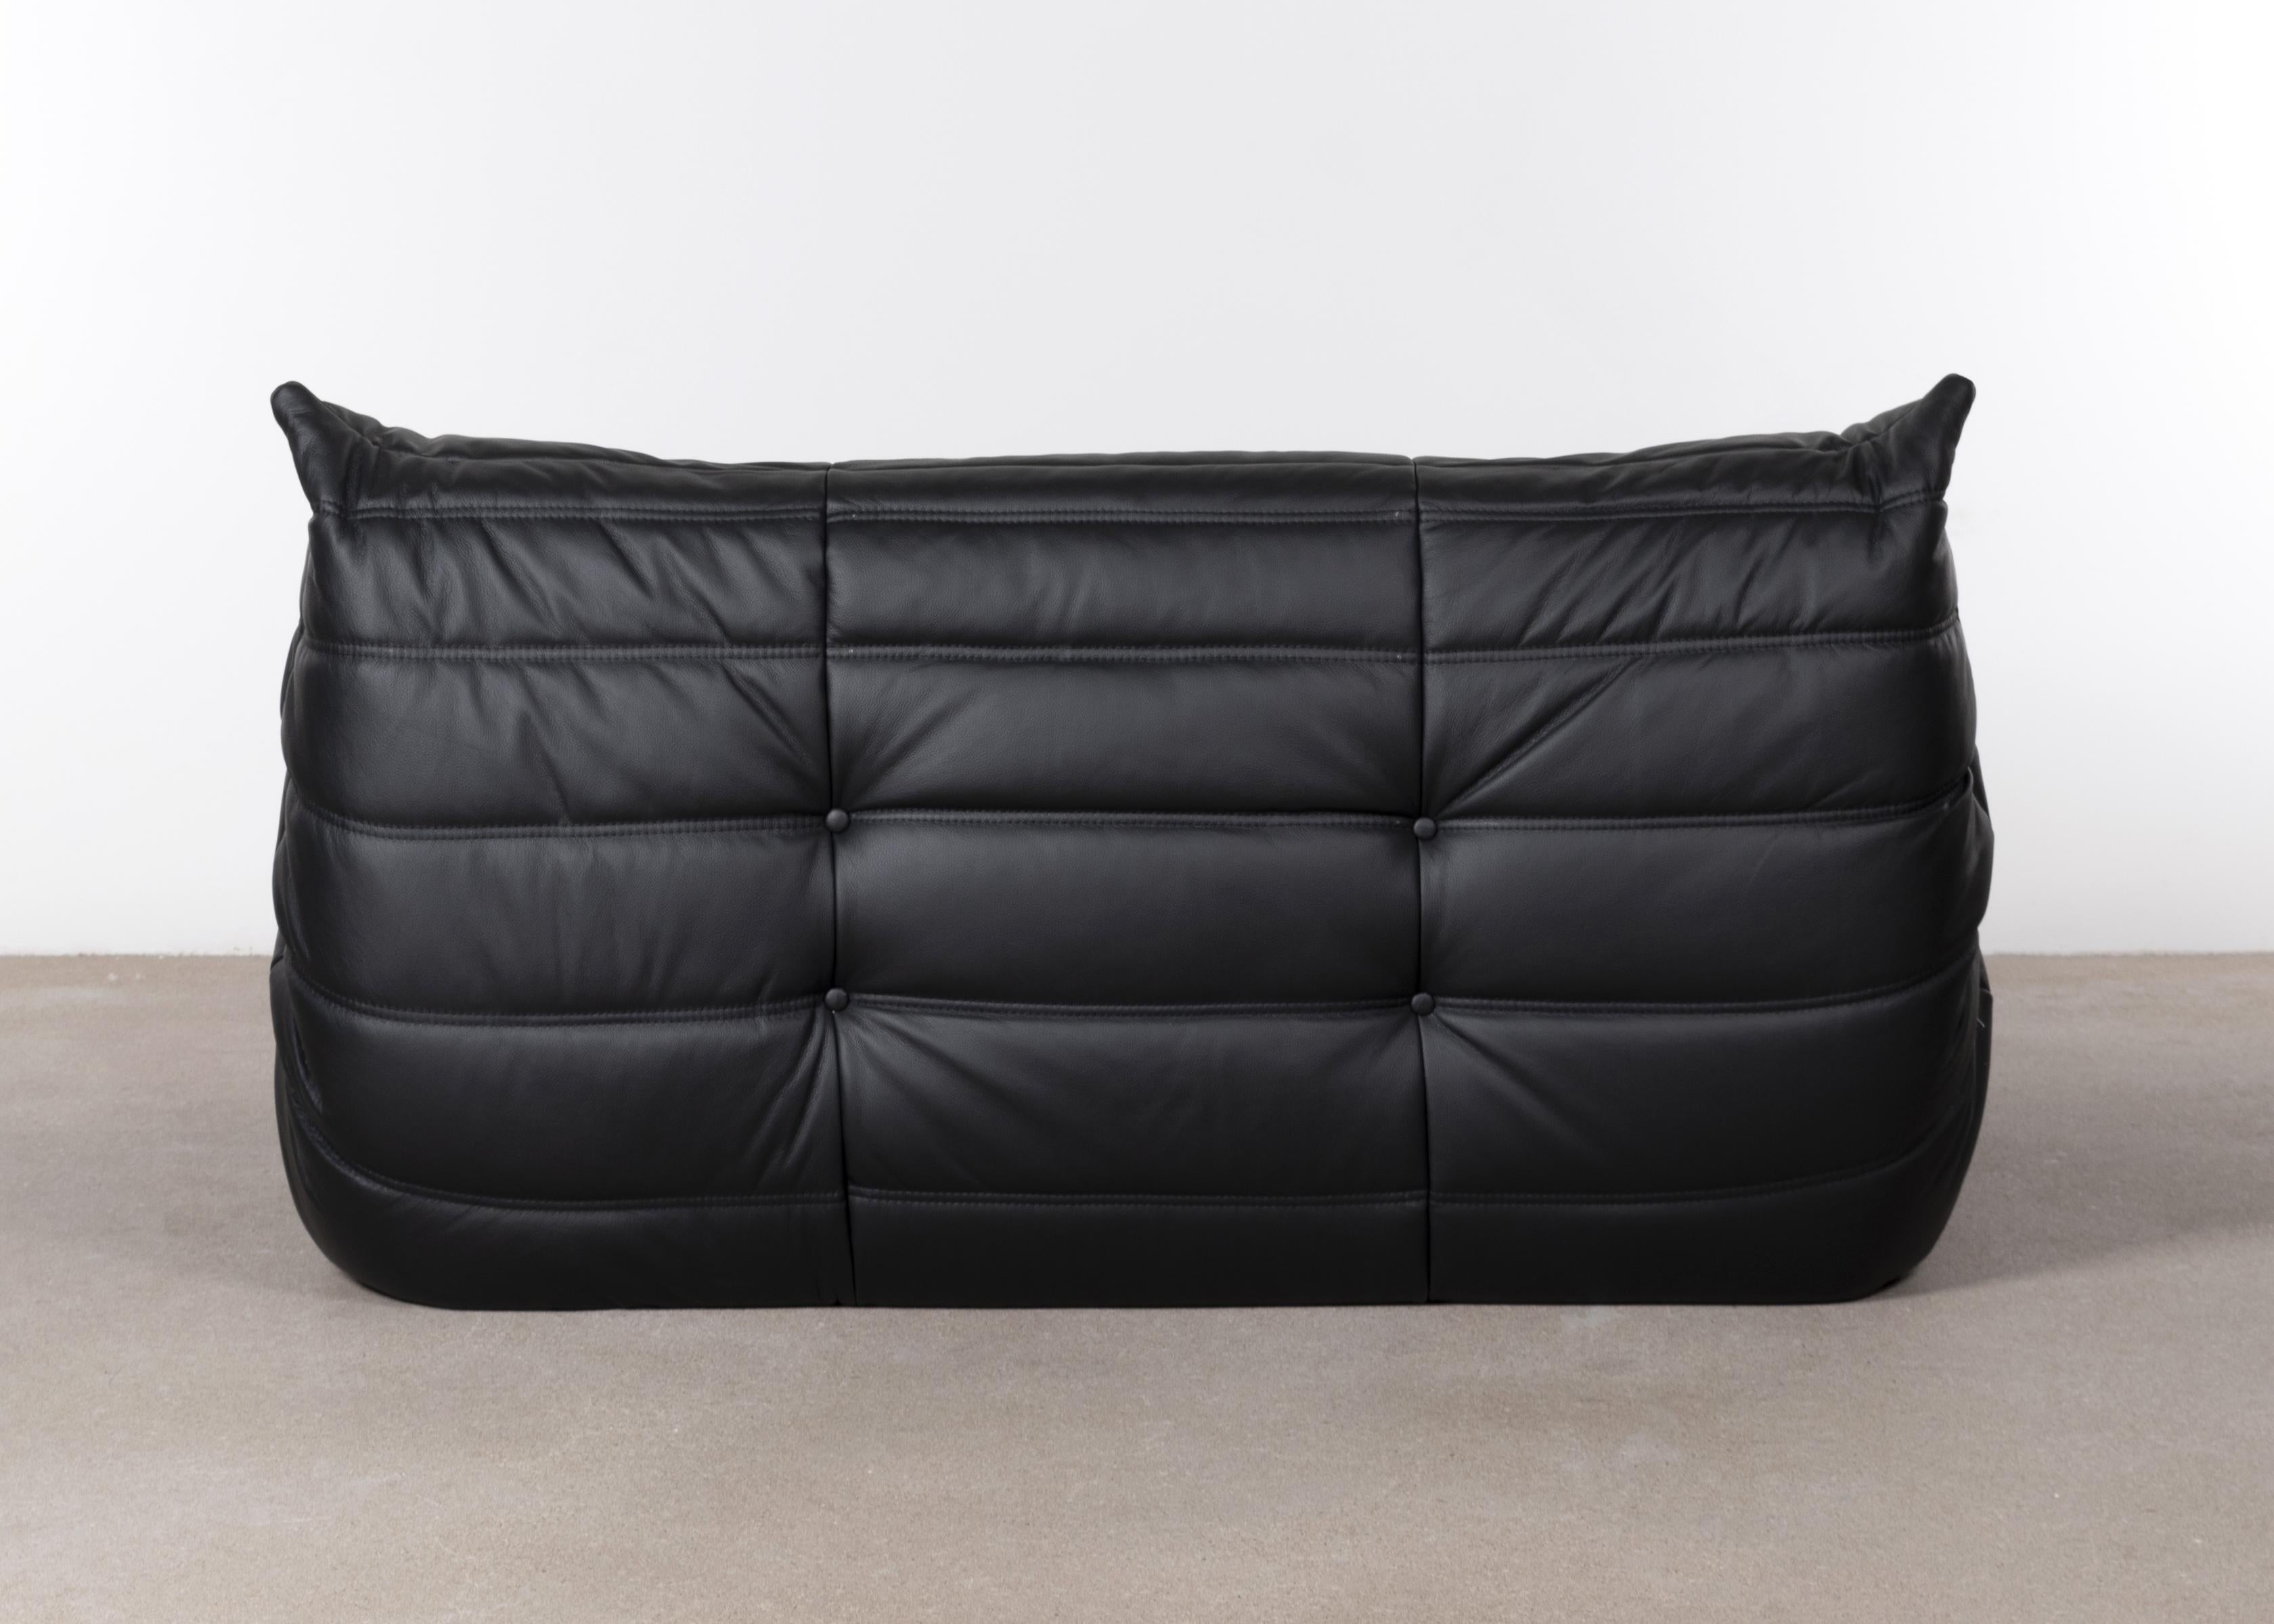 French Michel Ducaroy Togo Two-Seat Sofa in Black Leather for Ligne Roset, 1973